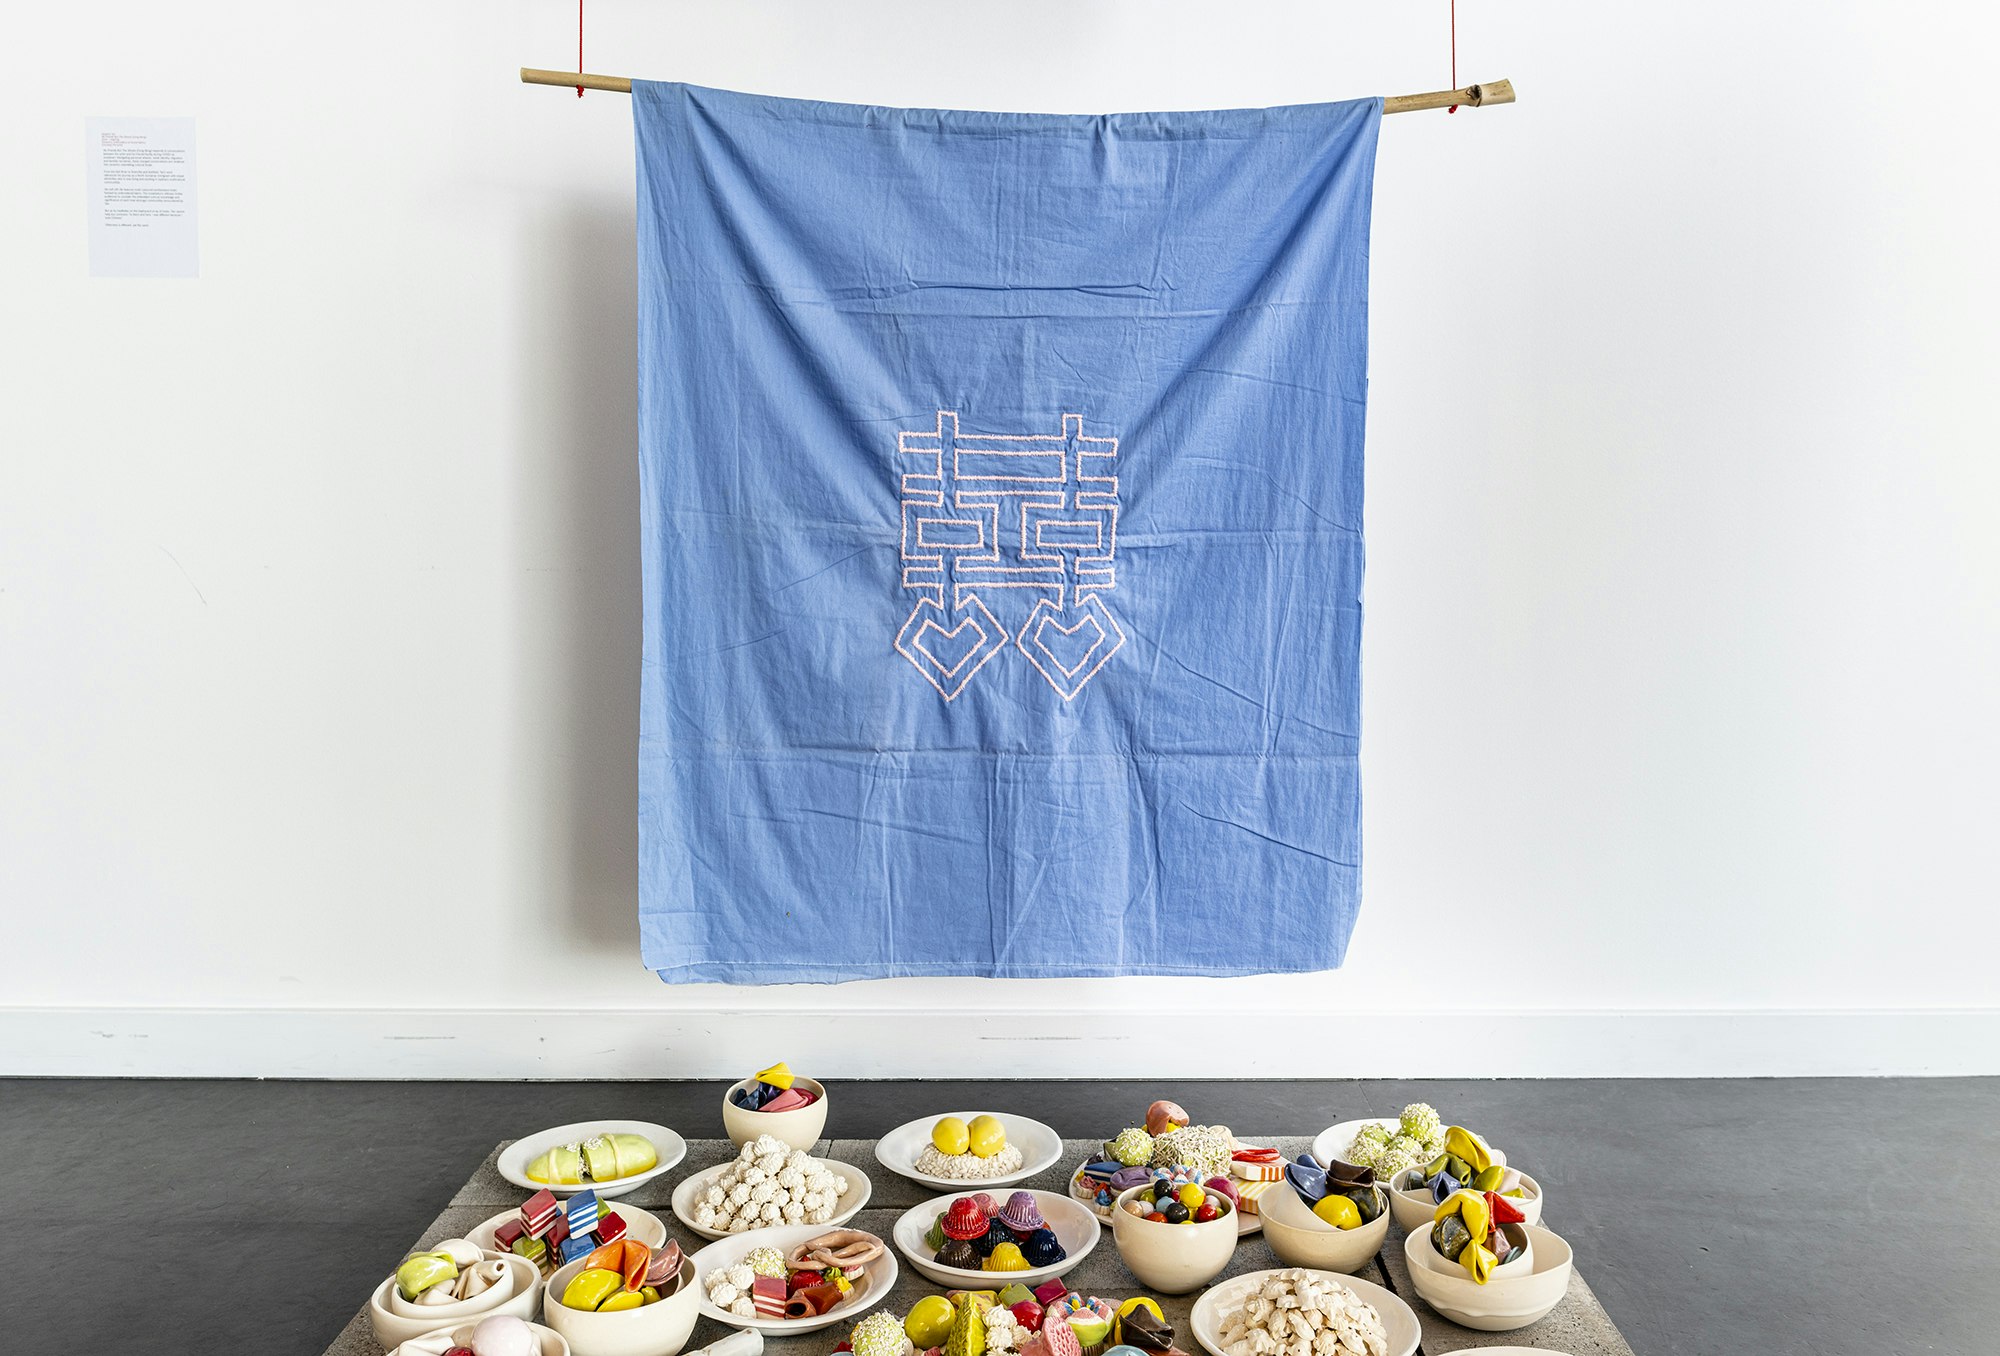 A colourful spread of earthenware sculptures imitating a spread of fruit, savoury snacks and East or Southeast Asian-inspired desserts. The spread features multicoloured fortune cookies, glutinous rice cakes, cakes rolled in shredded coconut and green, pink and red sticky rice cakes cut in the shapes of diamonds. Above this spread is a blue wall hanging embroidered with a fictional pink logogram.